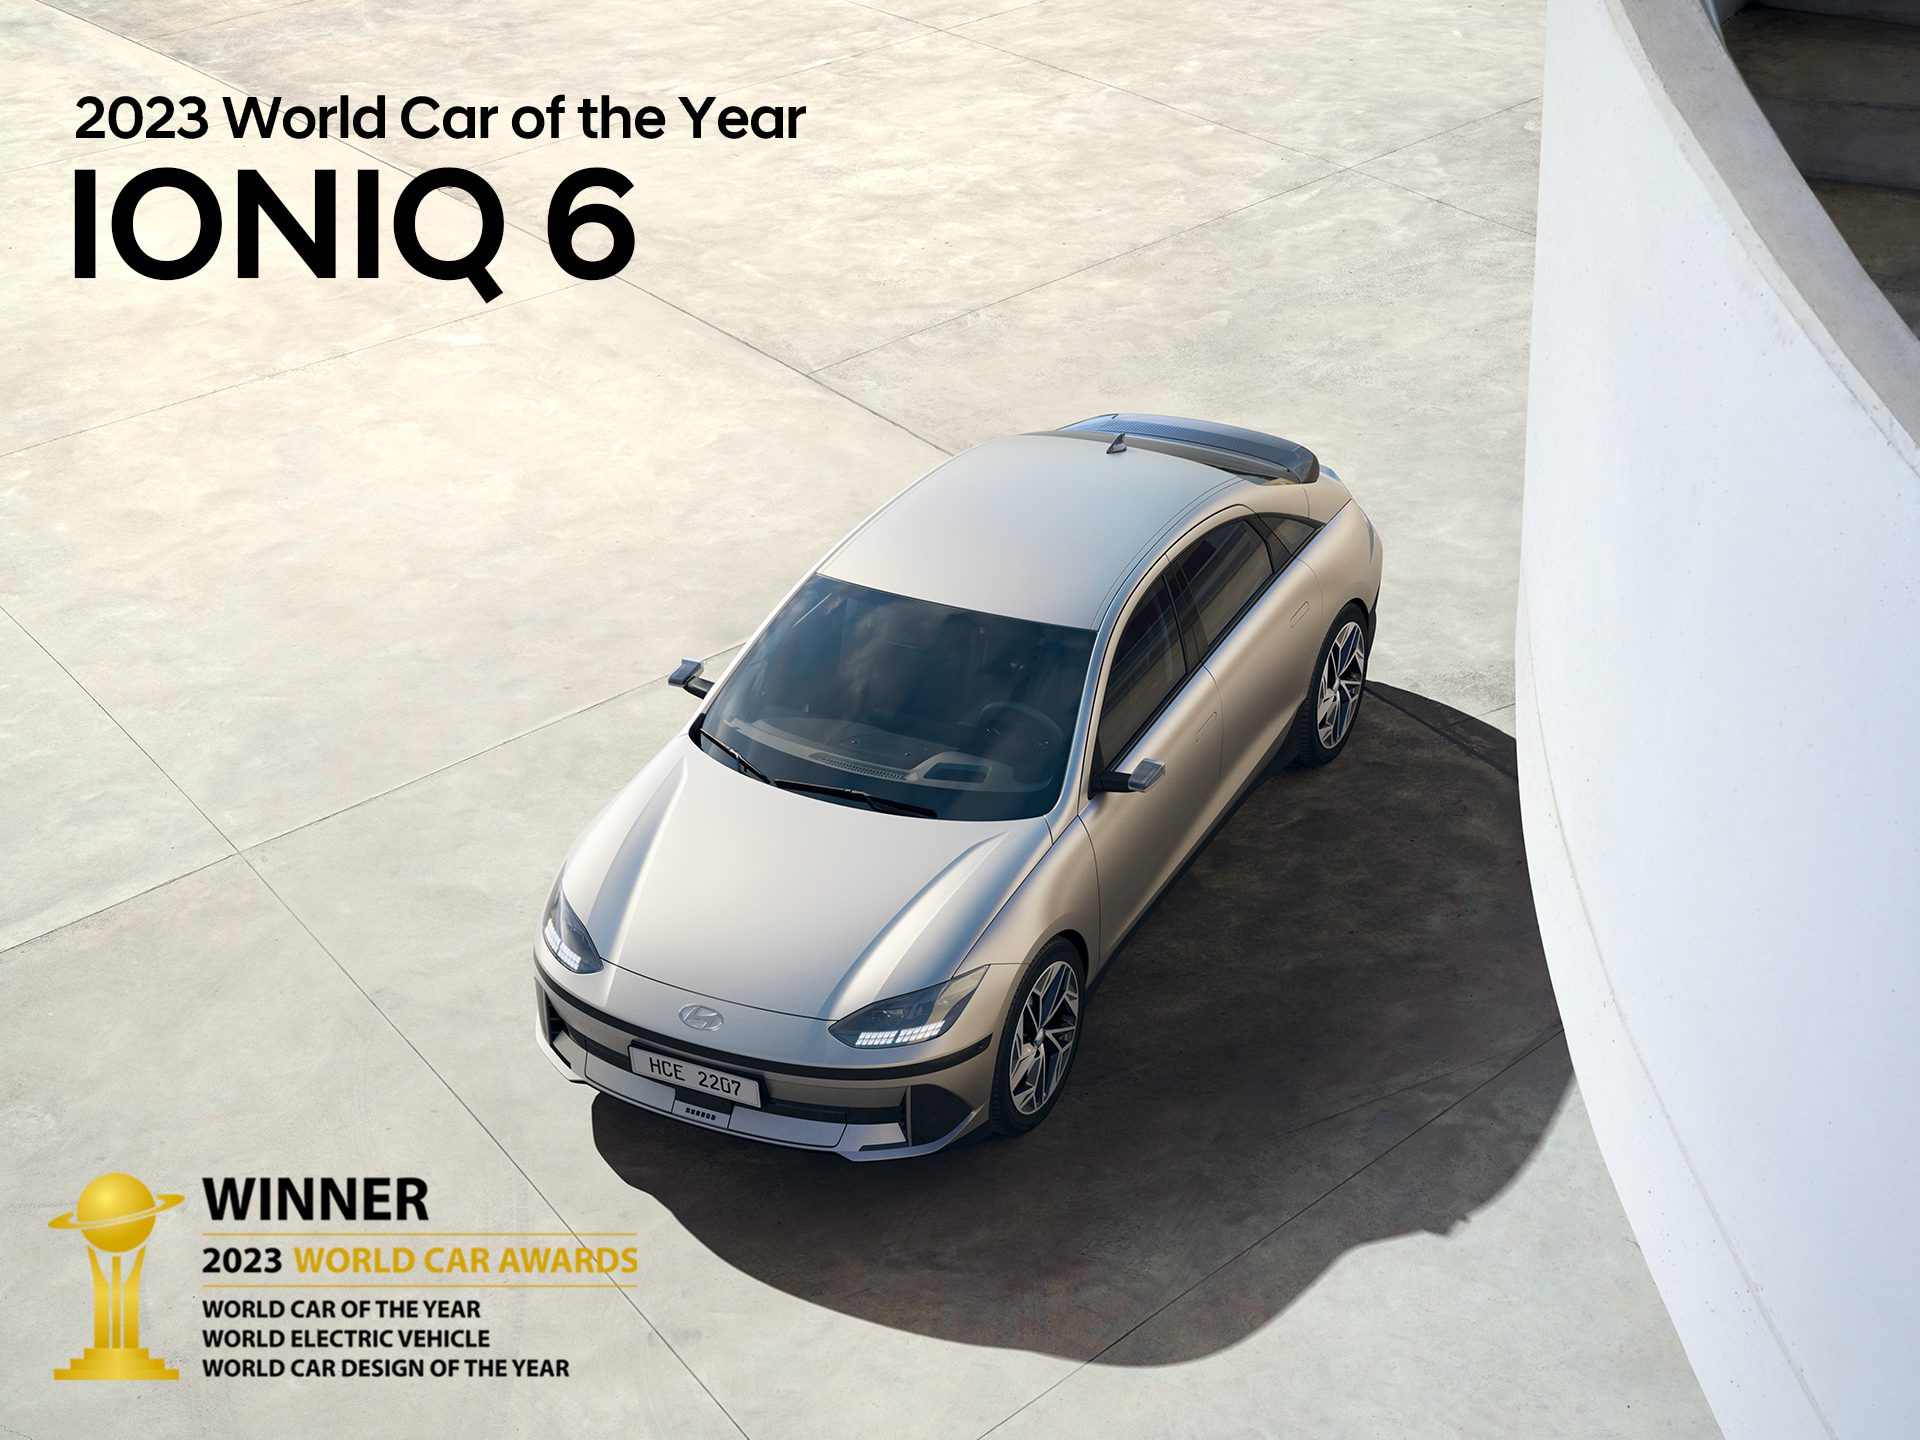 Overhead shot of the new Hyundai IONIQ 6 with a list of awards won at the 2023 Car of the Year Awards